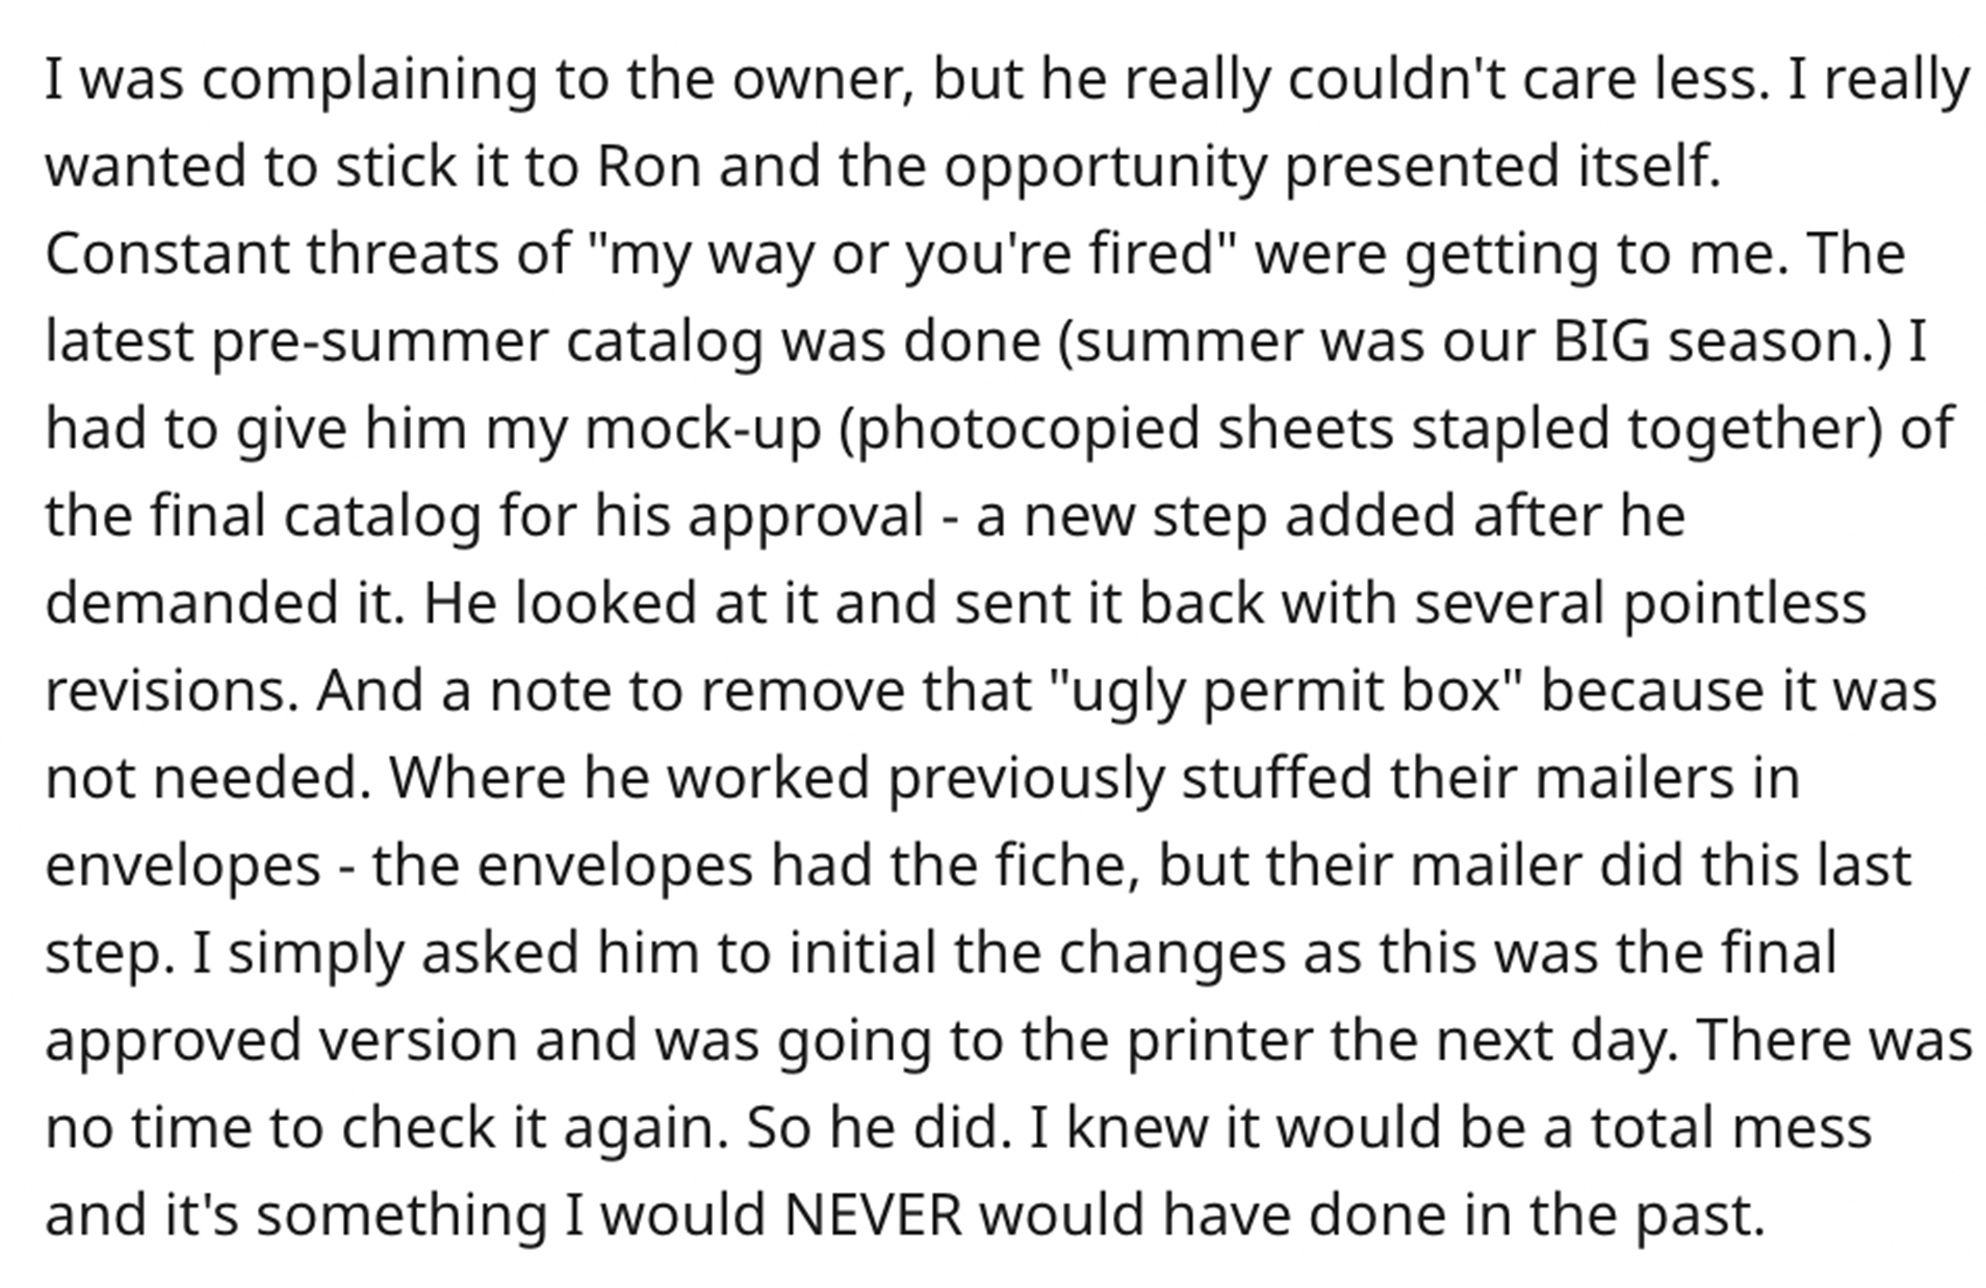 Entitled Boss gets fired - angle - I was complaining to the owner, but he really couldn't care less. I really wanted to stick it to Ron and the opportunity presented itself. Constant threats of "my way or you're fired" were getting to me. The latest presu